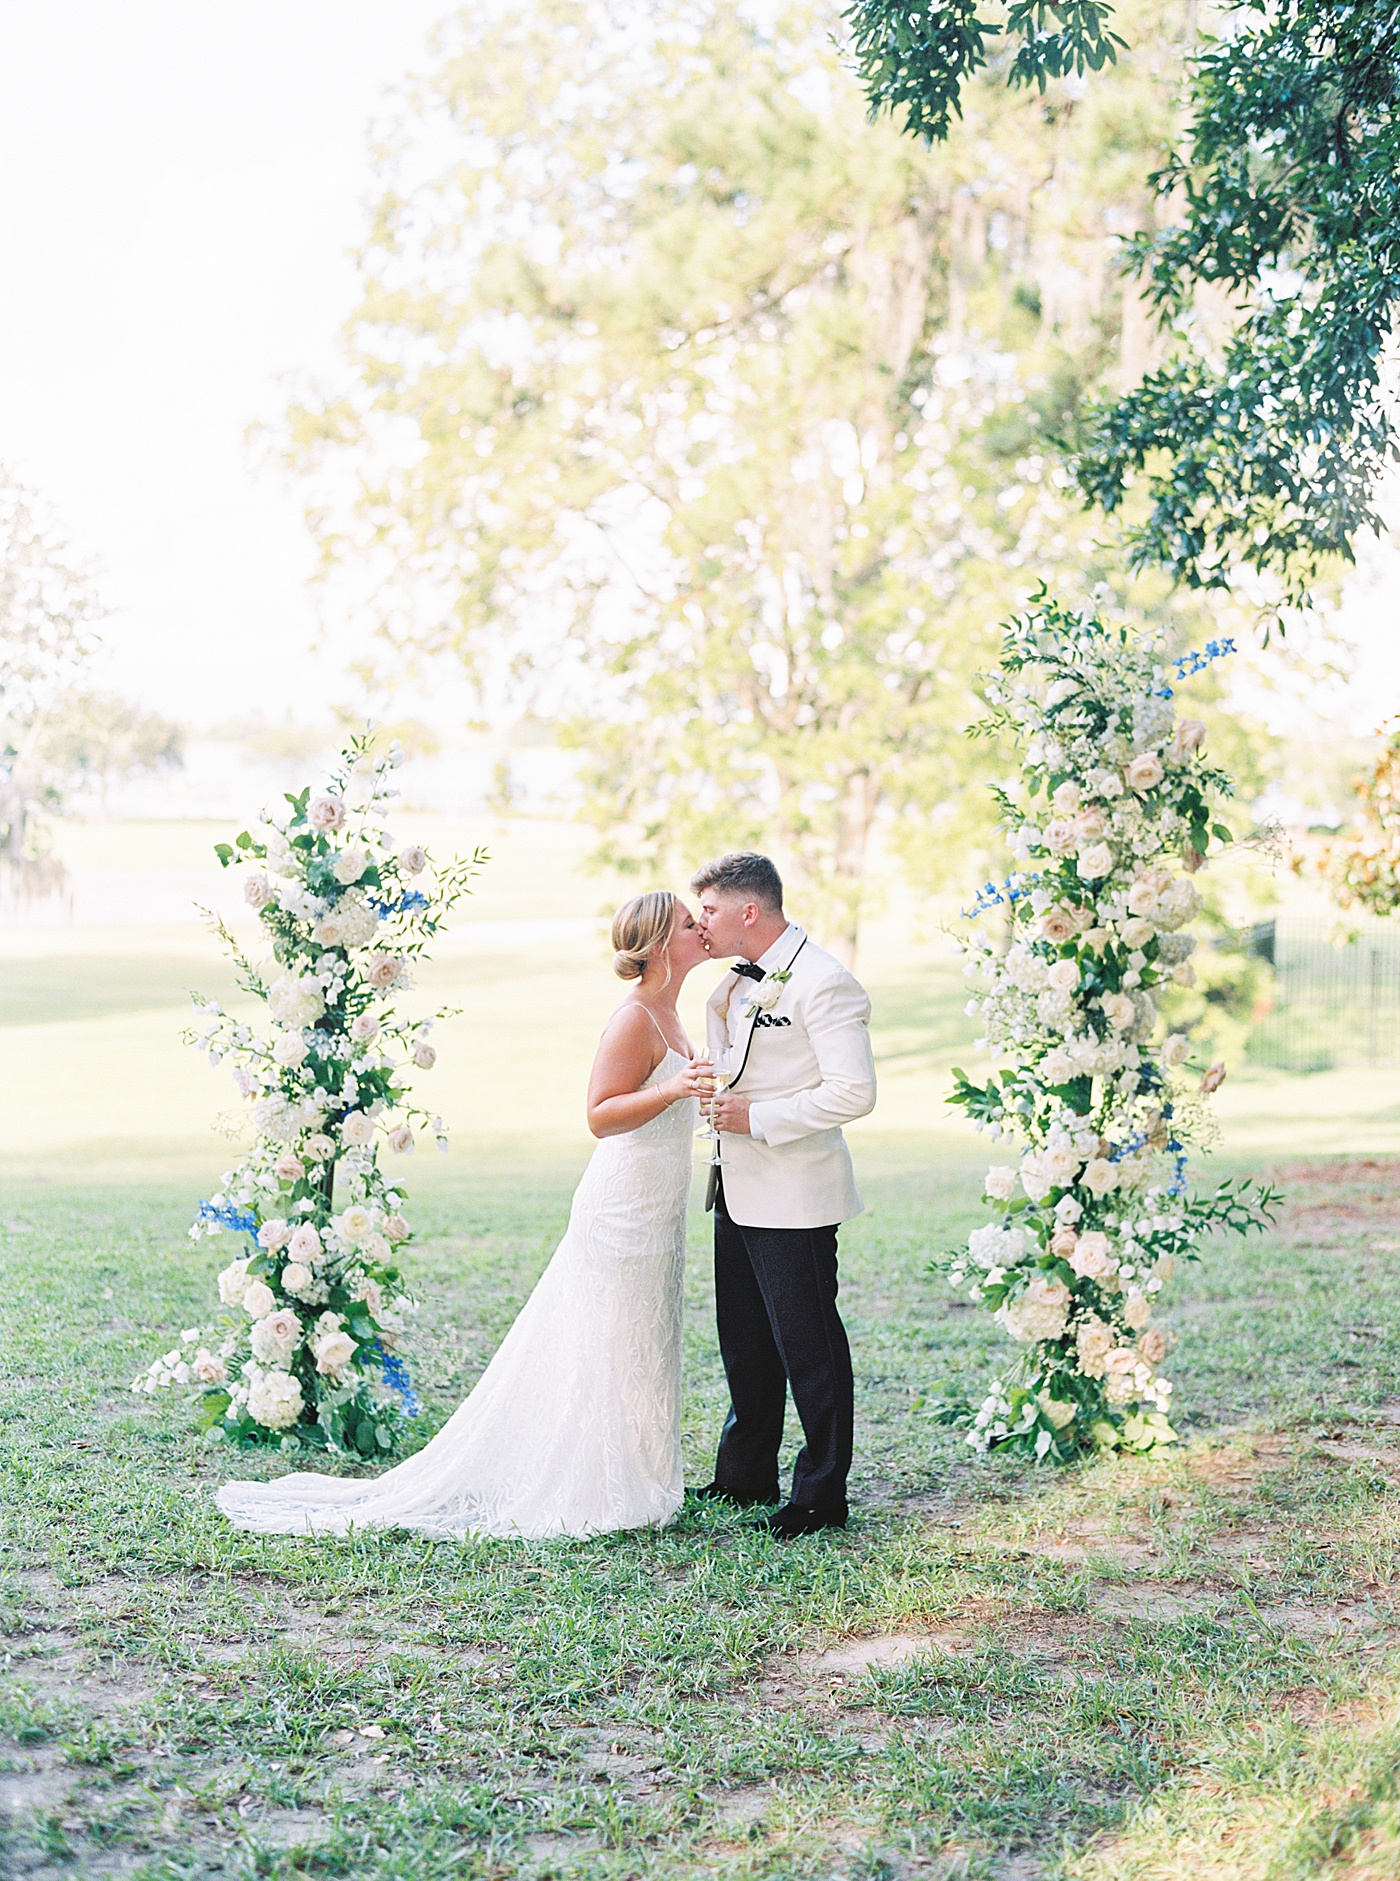 Bride and groom kissing under a floral arbor | Images by Annie Laura Photography